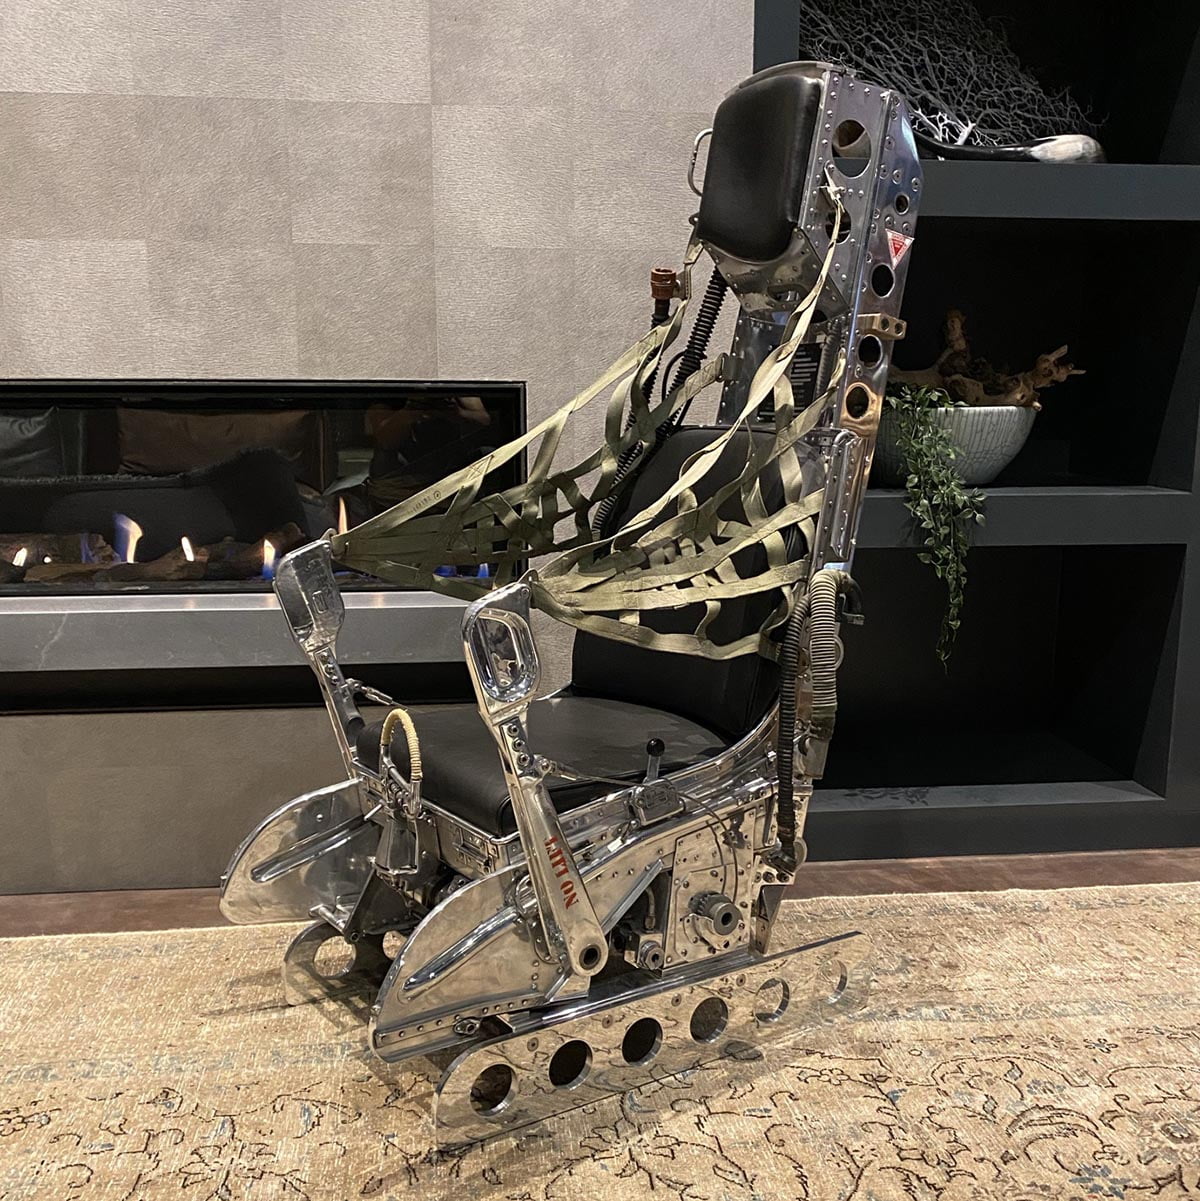 Polished Lockheed Martin ejection seat in a living room.